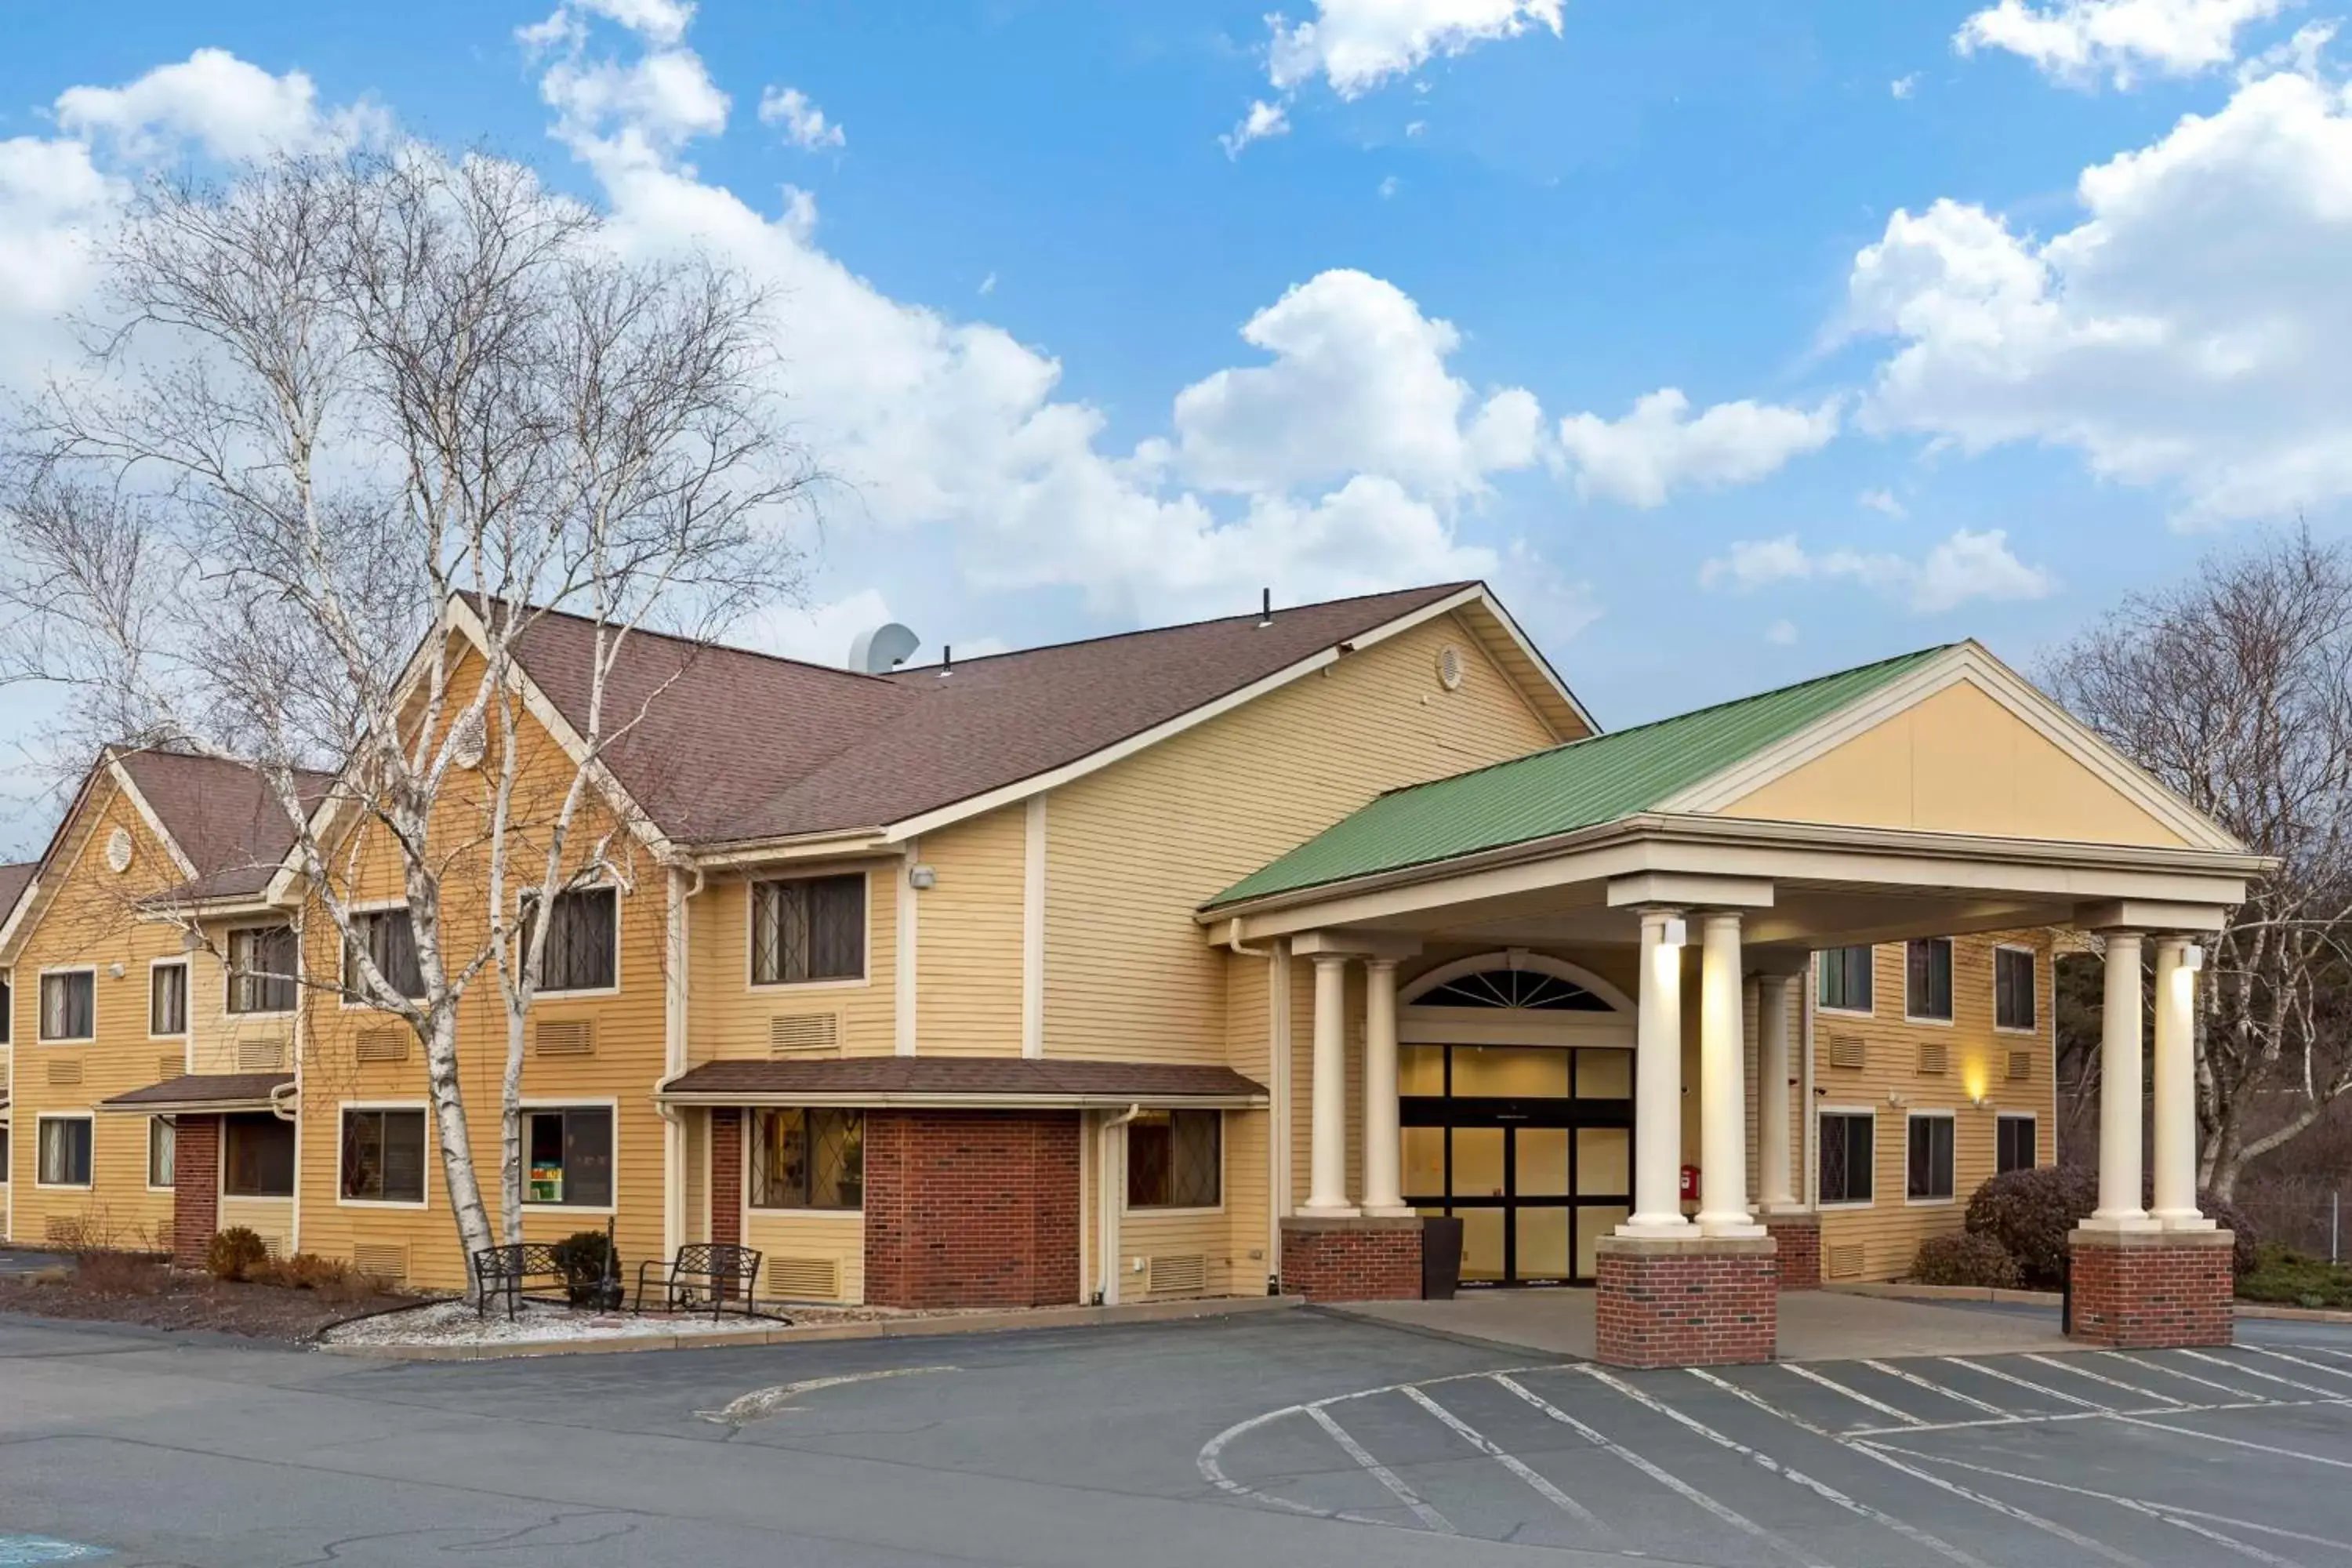 Property Building in Best Western Plus The Inn at Sharon/Foxboro